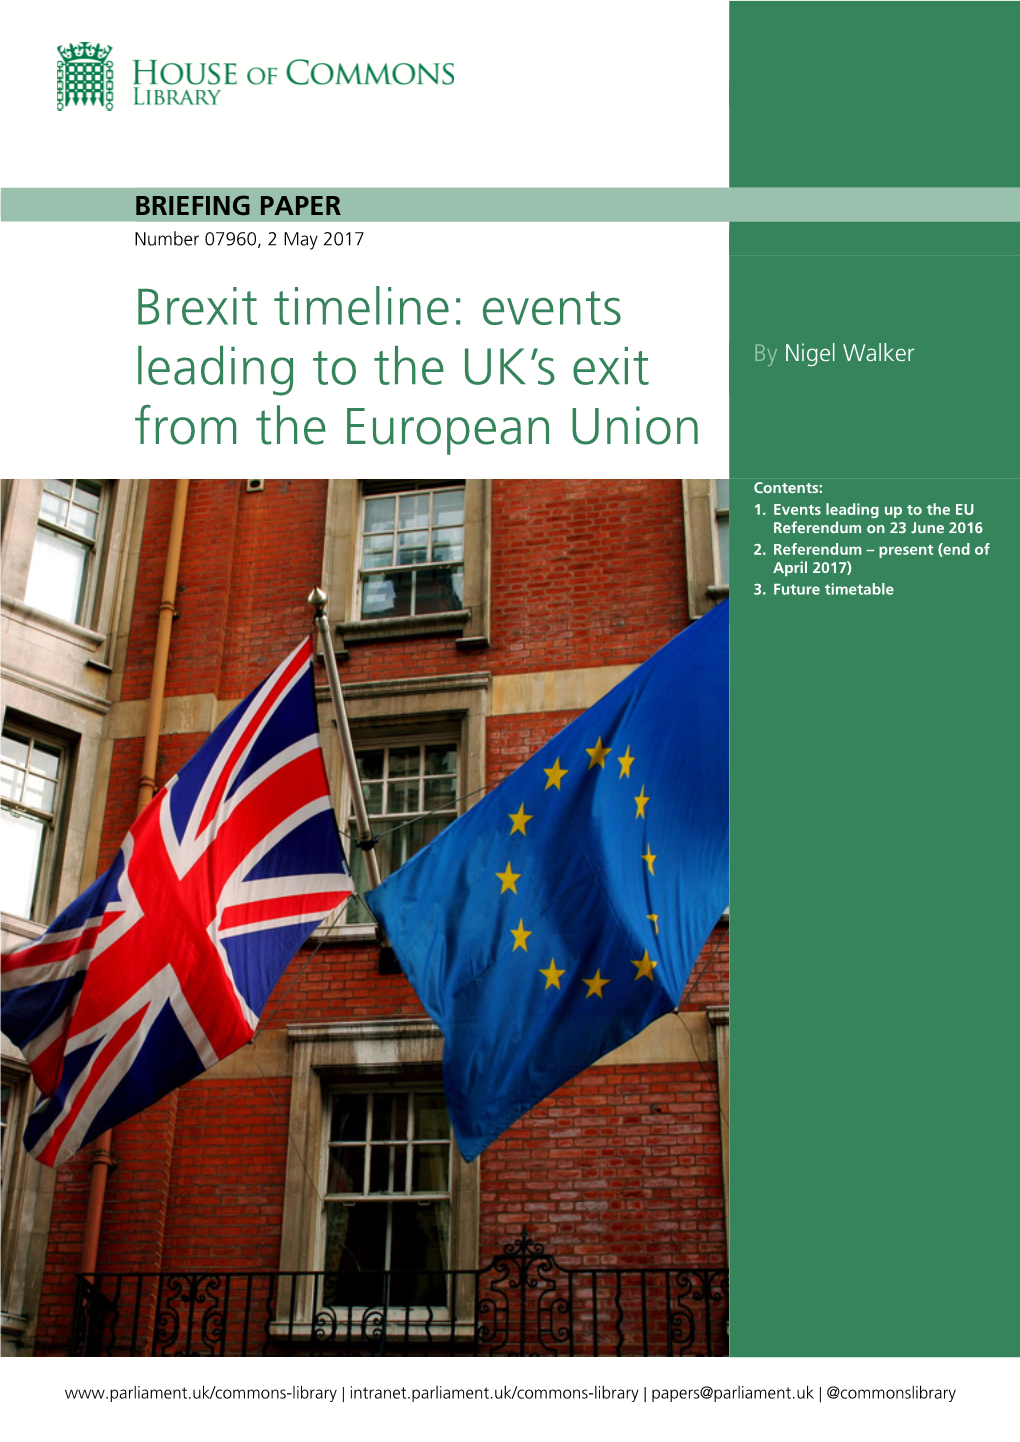 Brexit Timeline: Events Leading to the UK's Exit from the European Union